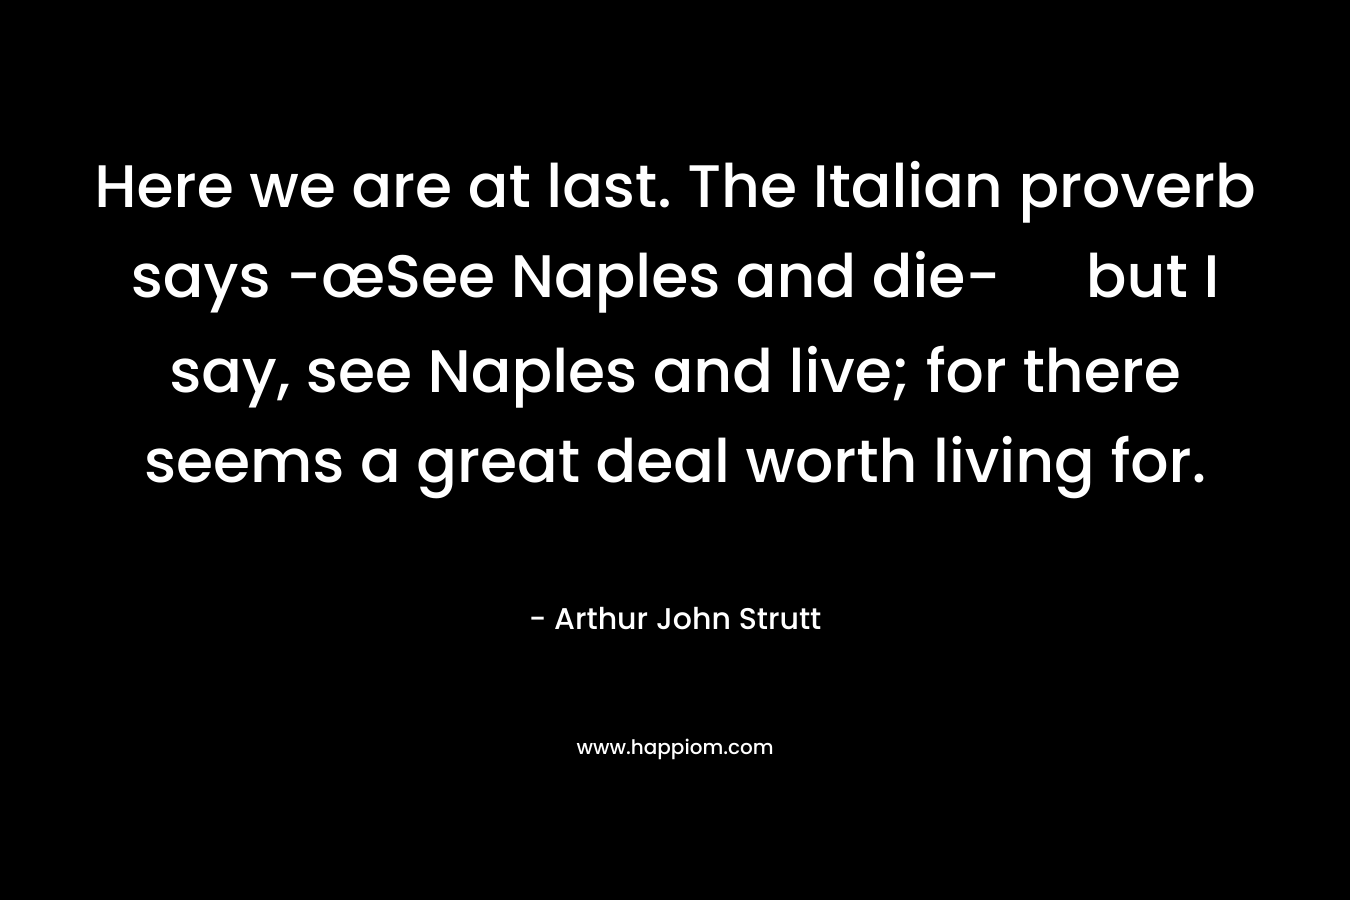 Here we are at last. The Italian proverb says -œSee Naples and die- but I say, see Naples and live; for there seems a great deal worth living for. – Arthur John Strutt